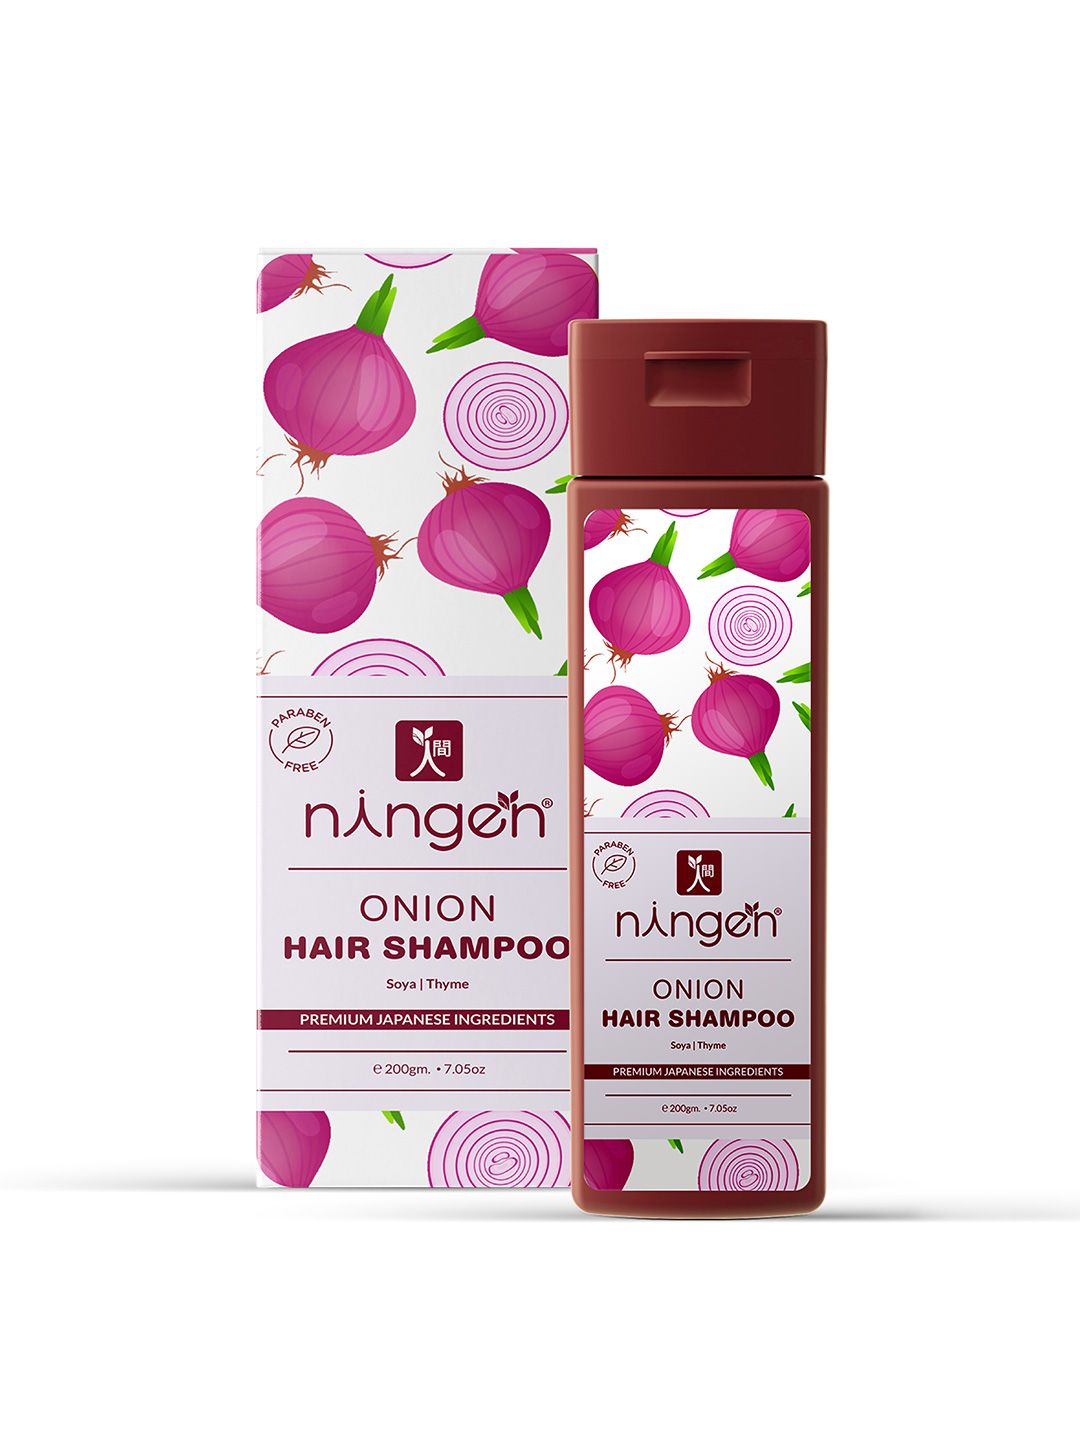 Ningen Onion Hair Shampoo With Soya and Thyme For Hair Fall & Dandruff 200g Price in India